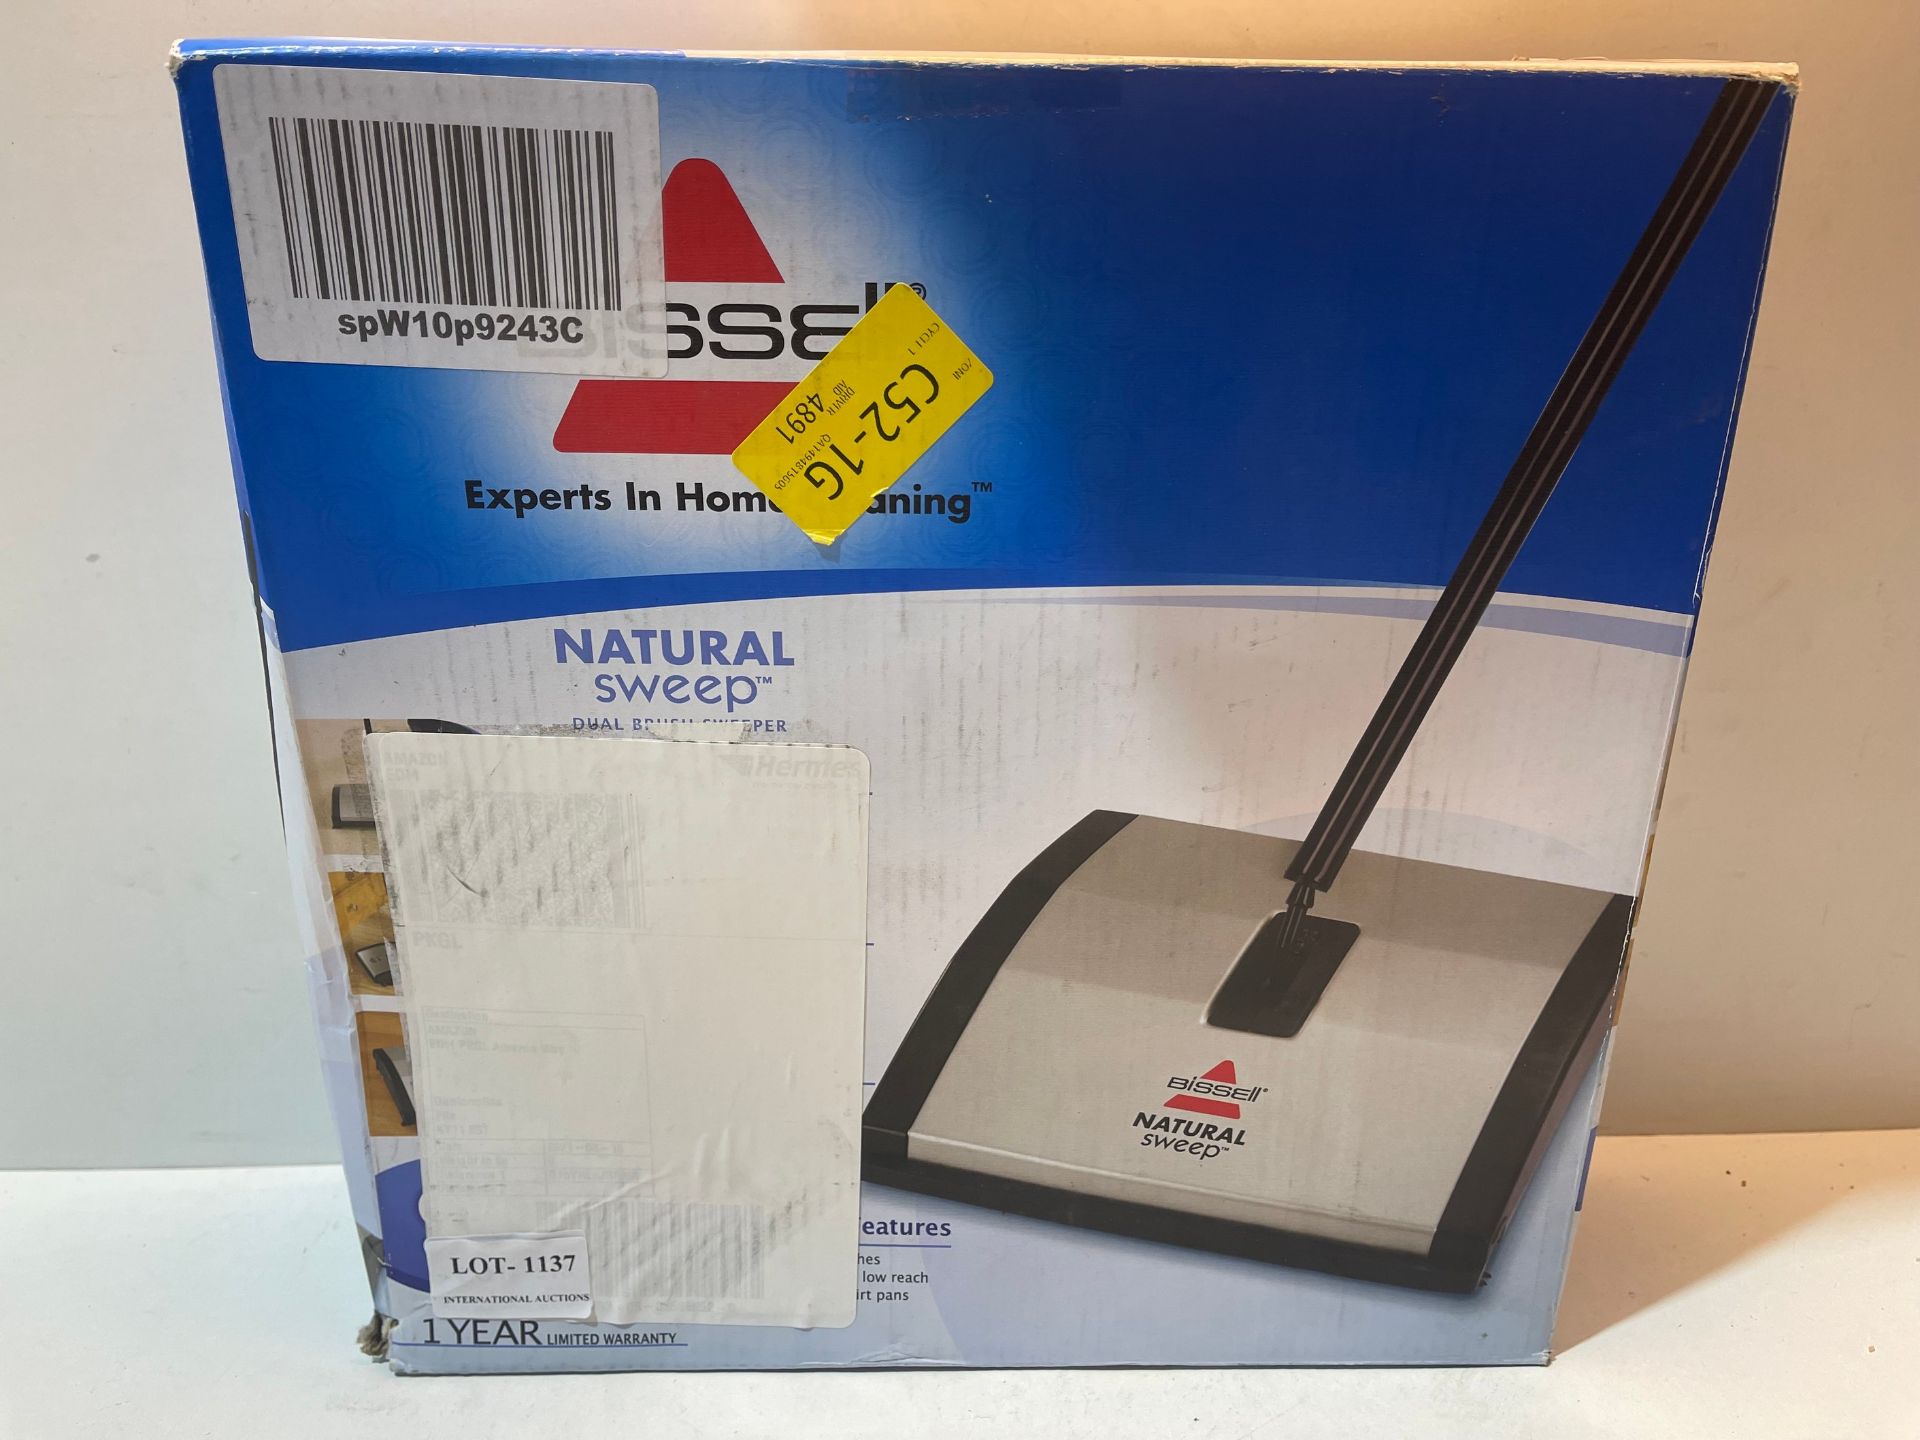 BISSELL Natural Sweep | Easy-Empty Sweeper For Carpets And Hard Floors | 92N0E £24.99Condition